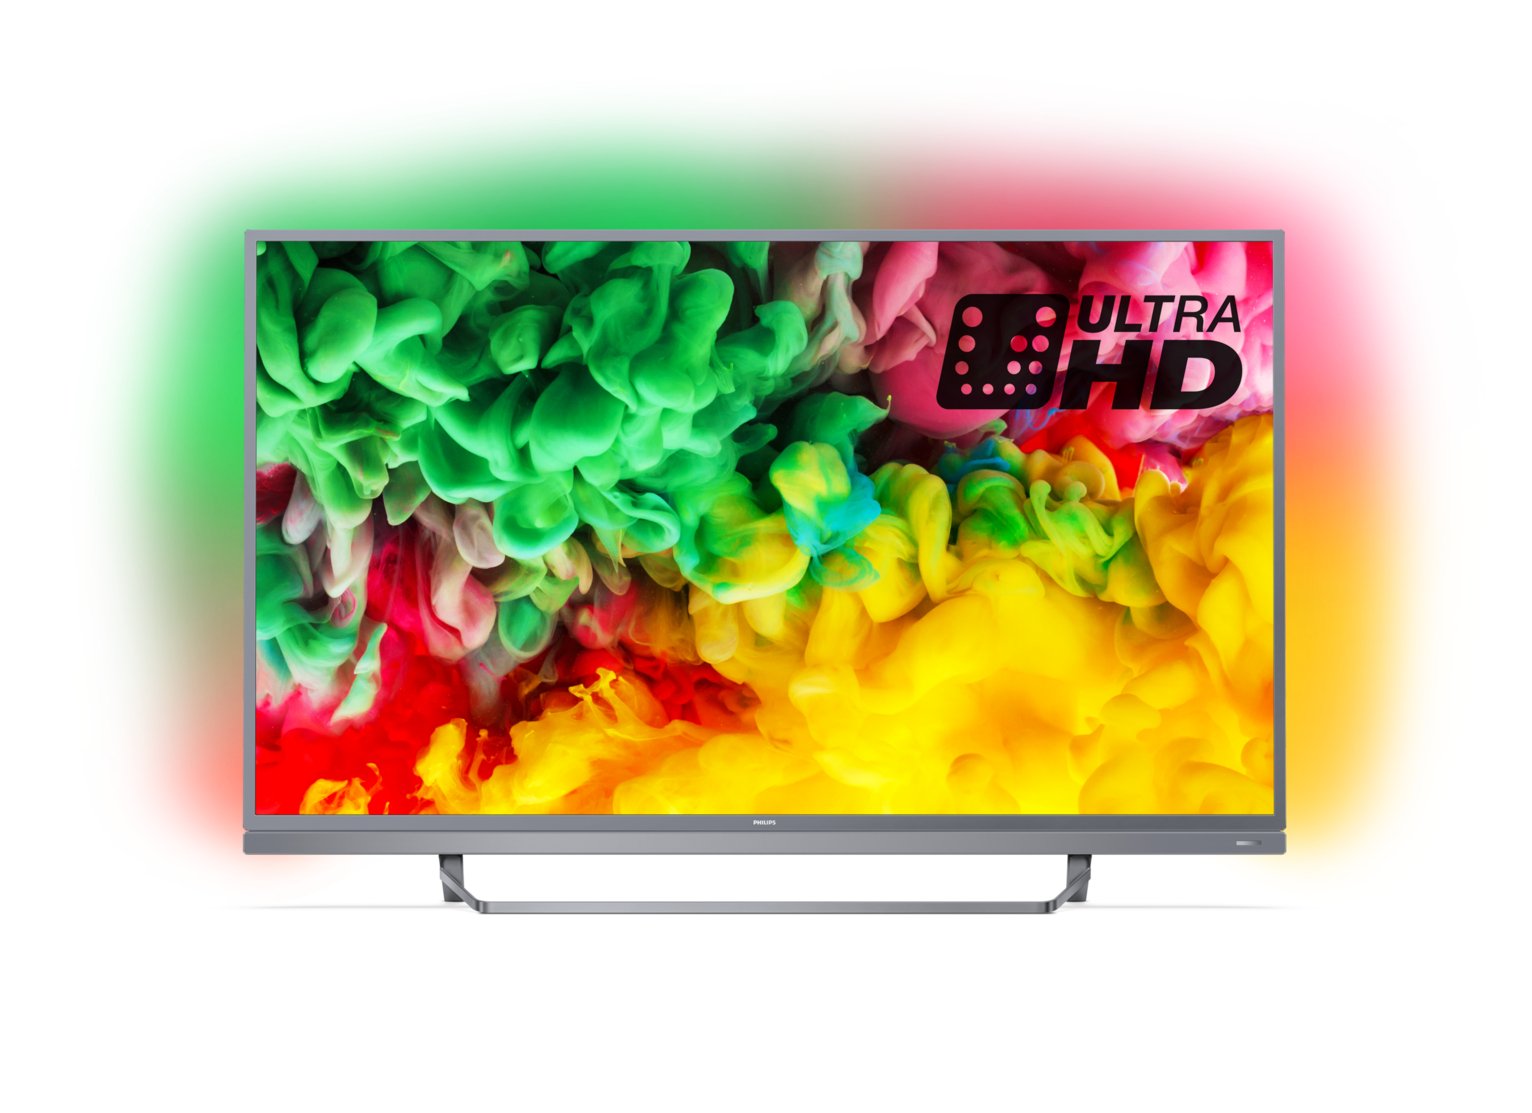 Philips 55PUS6803 55 Inch Smart UHD Amiblight TV with HDR review